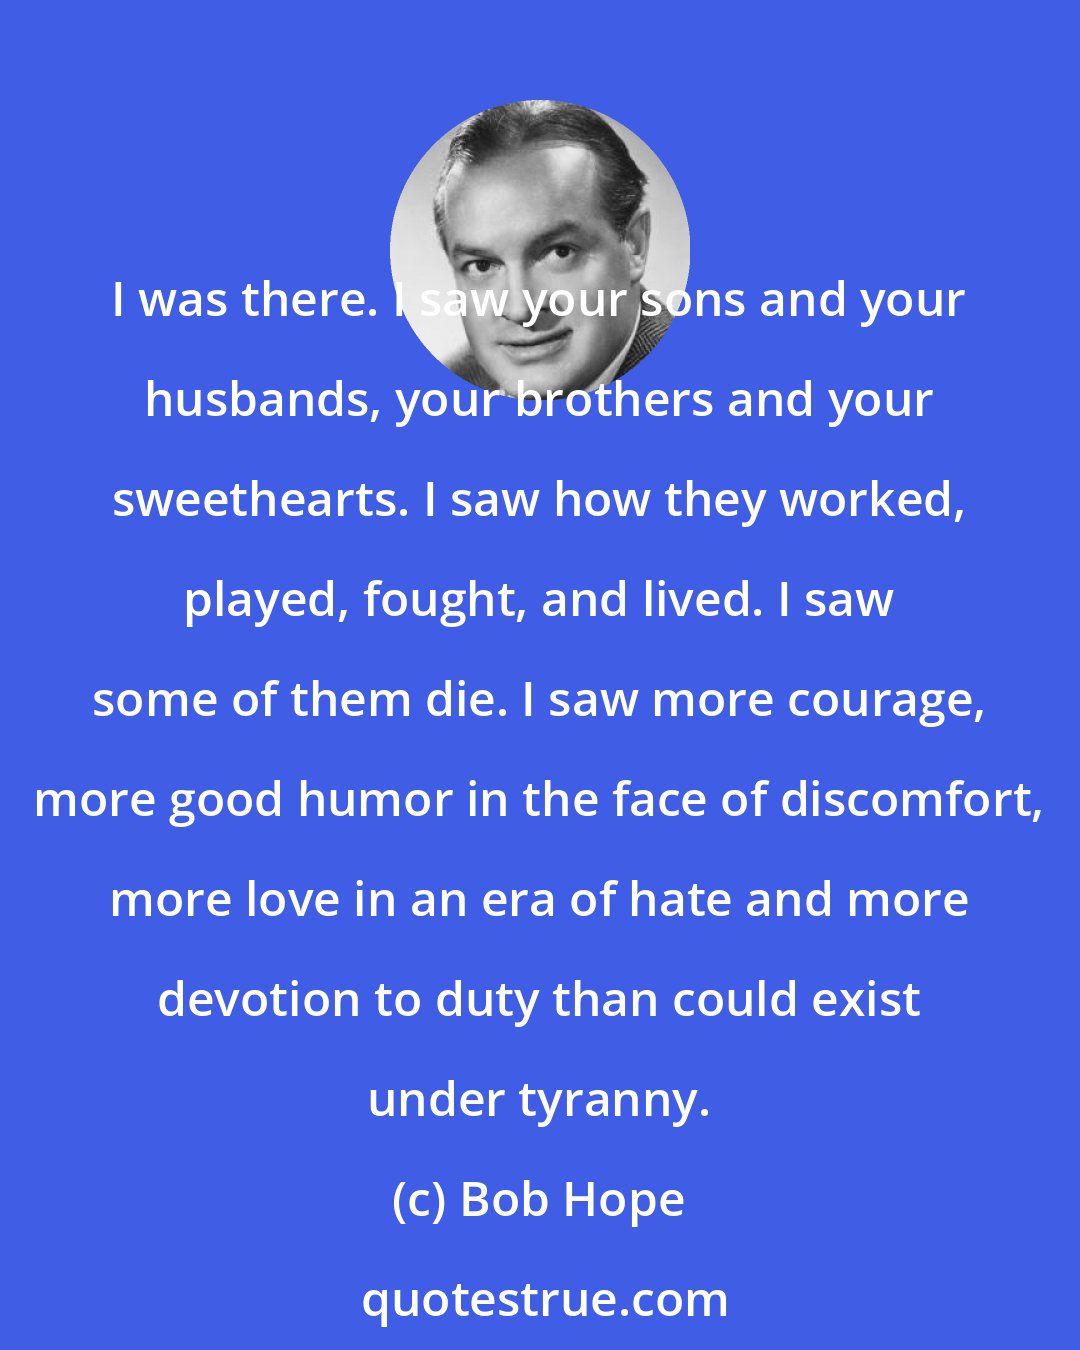 Bob Hope: I was there. I saw your sons and your husbands, your brothers and your sweethearts. I saw how they worked, played, fought, and lived. I saw some of them die. I saw more courage, more good humor in the face of discomfort, more love in an era of hate and more devotion to duty than could exist under tyranny.